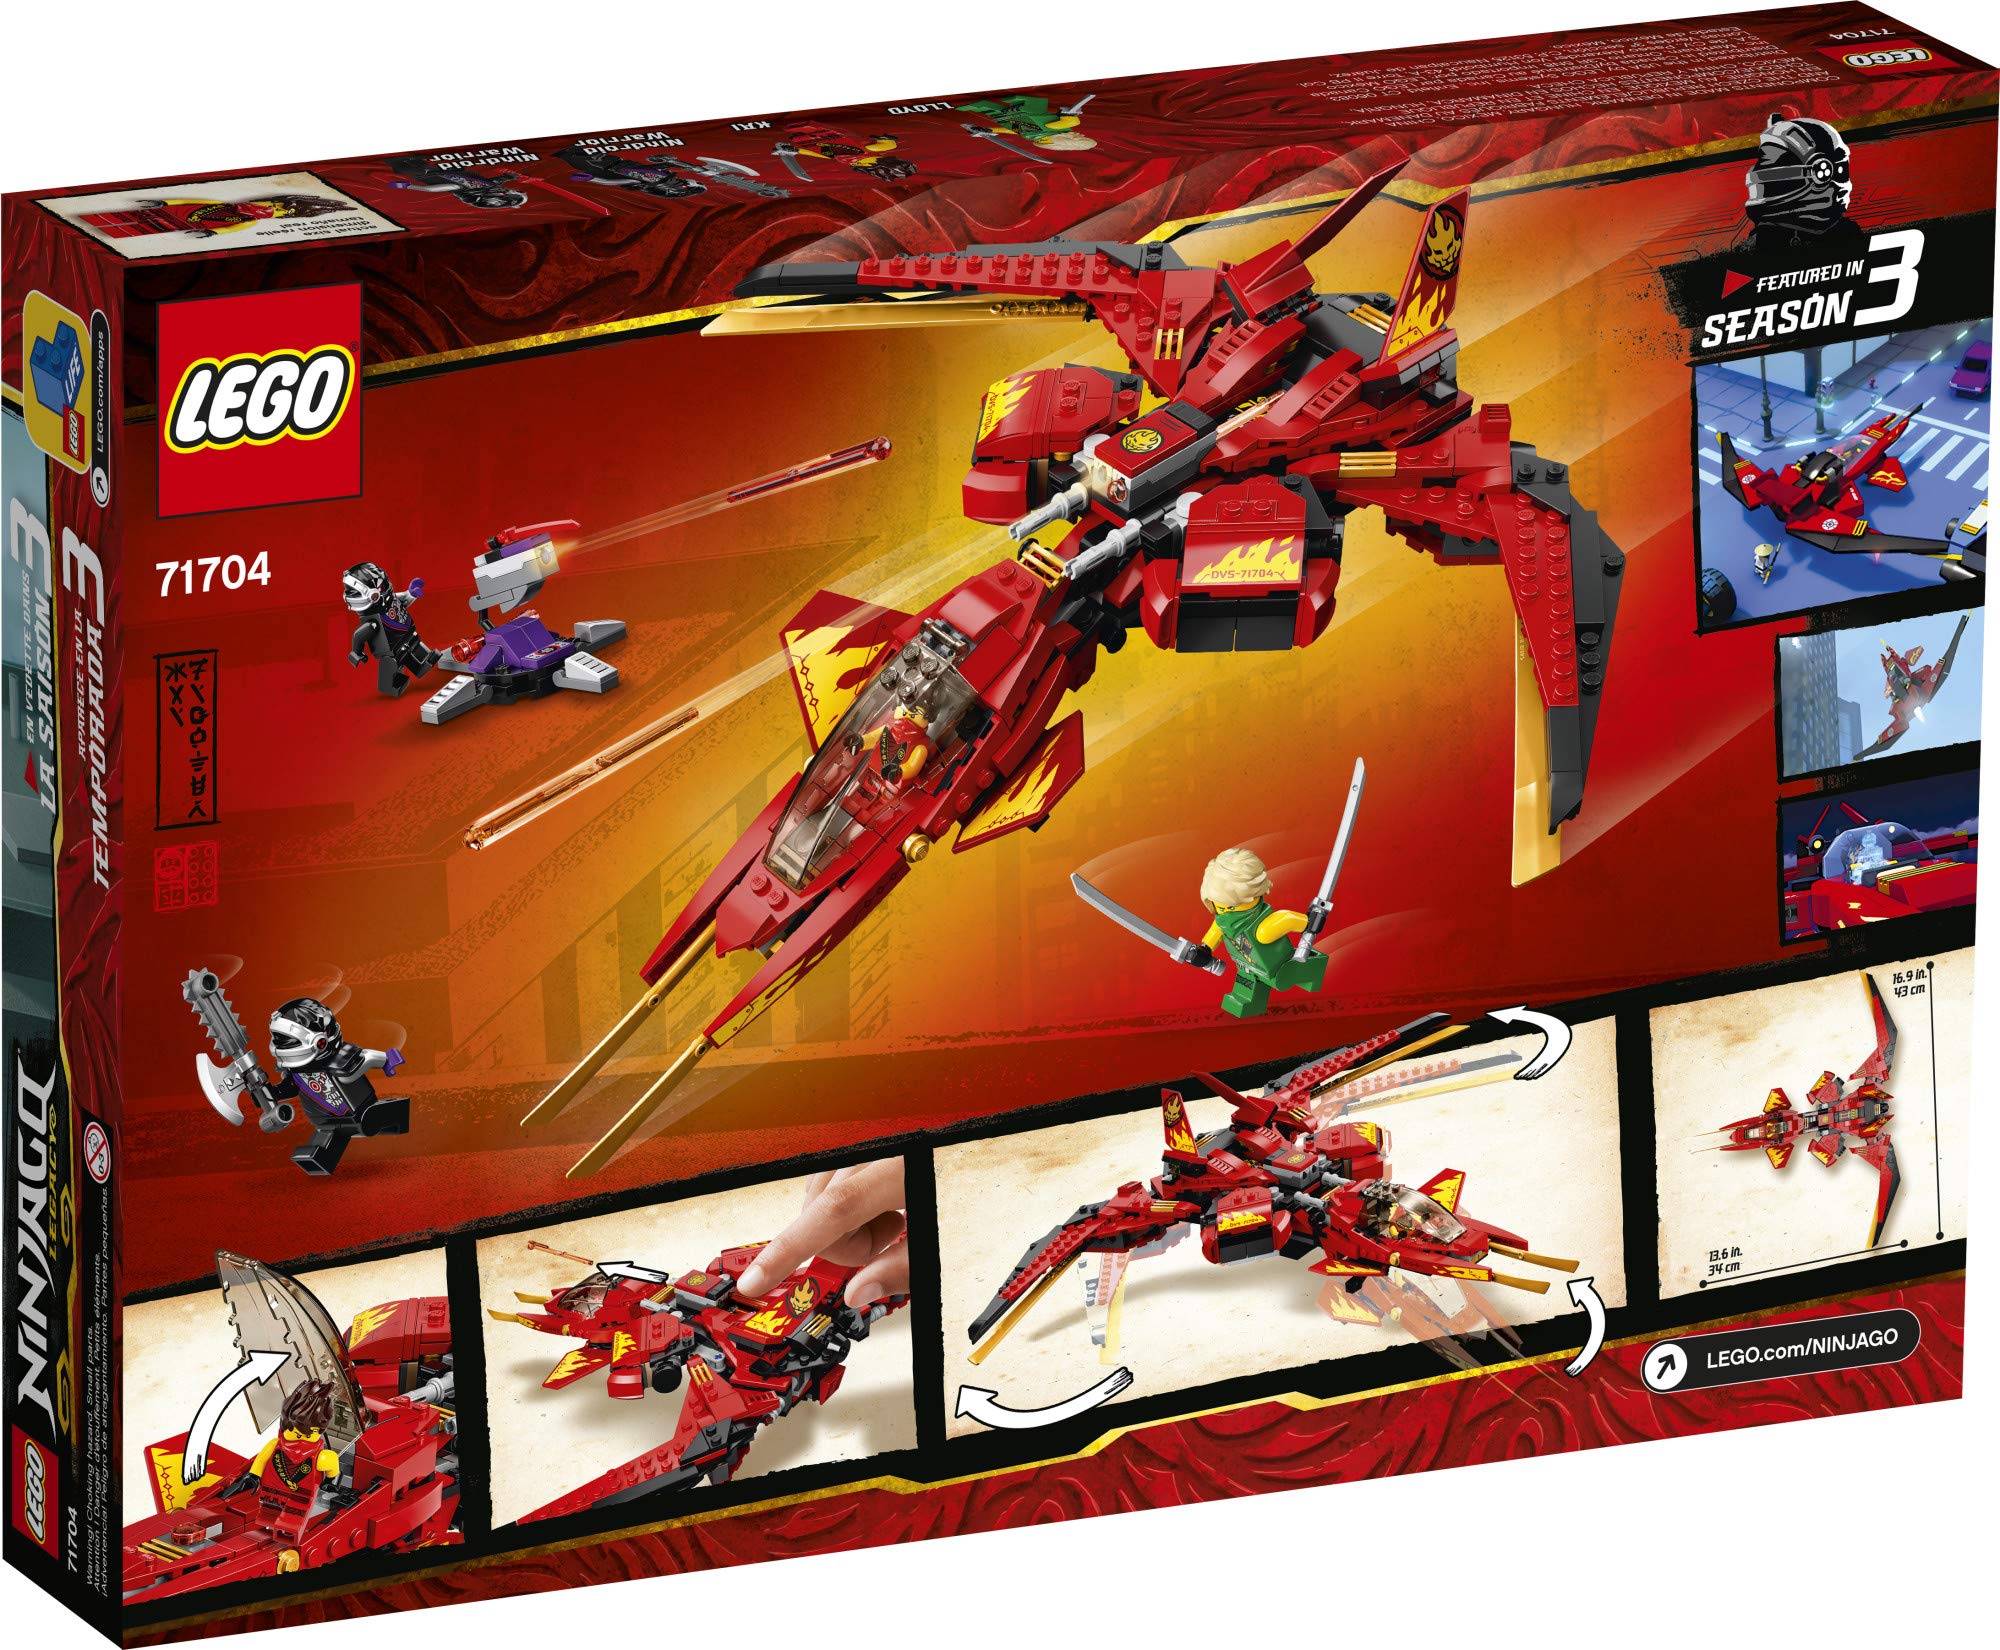 LEGO NINJAGO Legacy Kai Fighter 71704 Building Set for Kids Featuring Ninja Action Figures (513 Pieces)